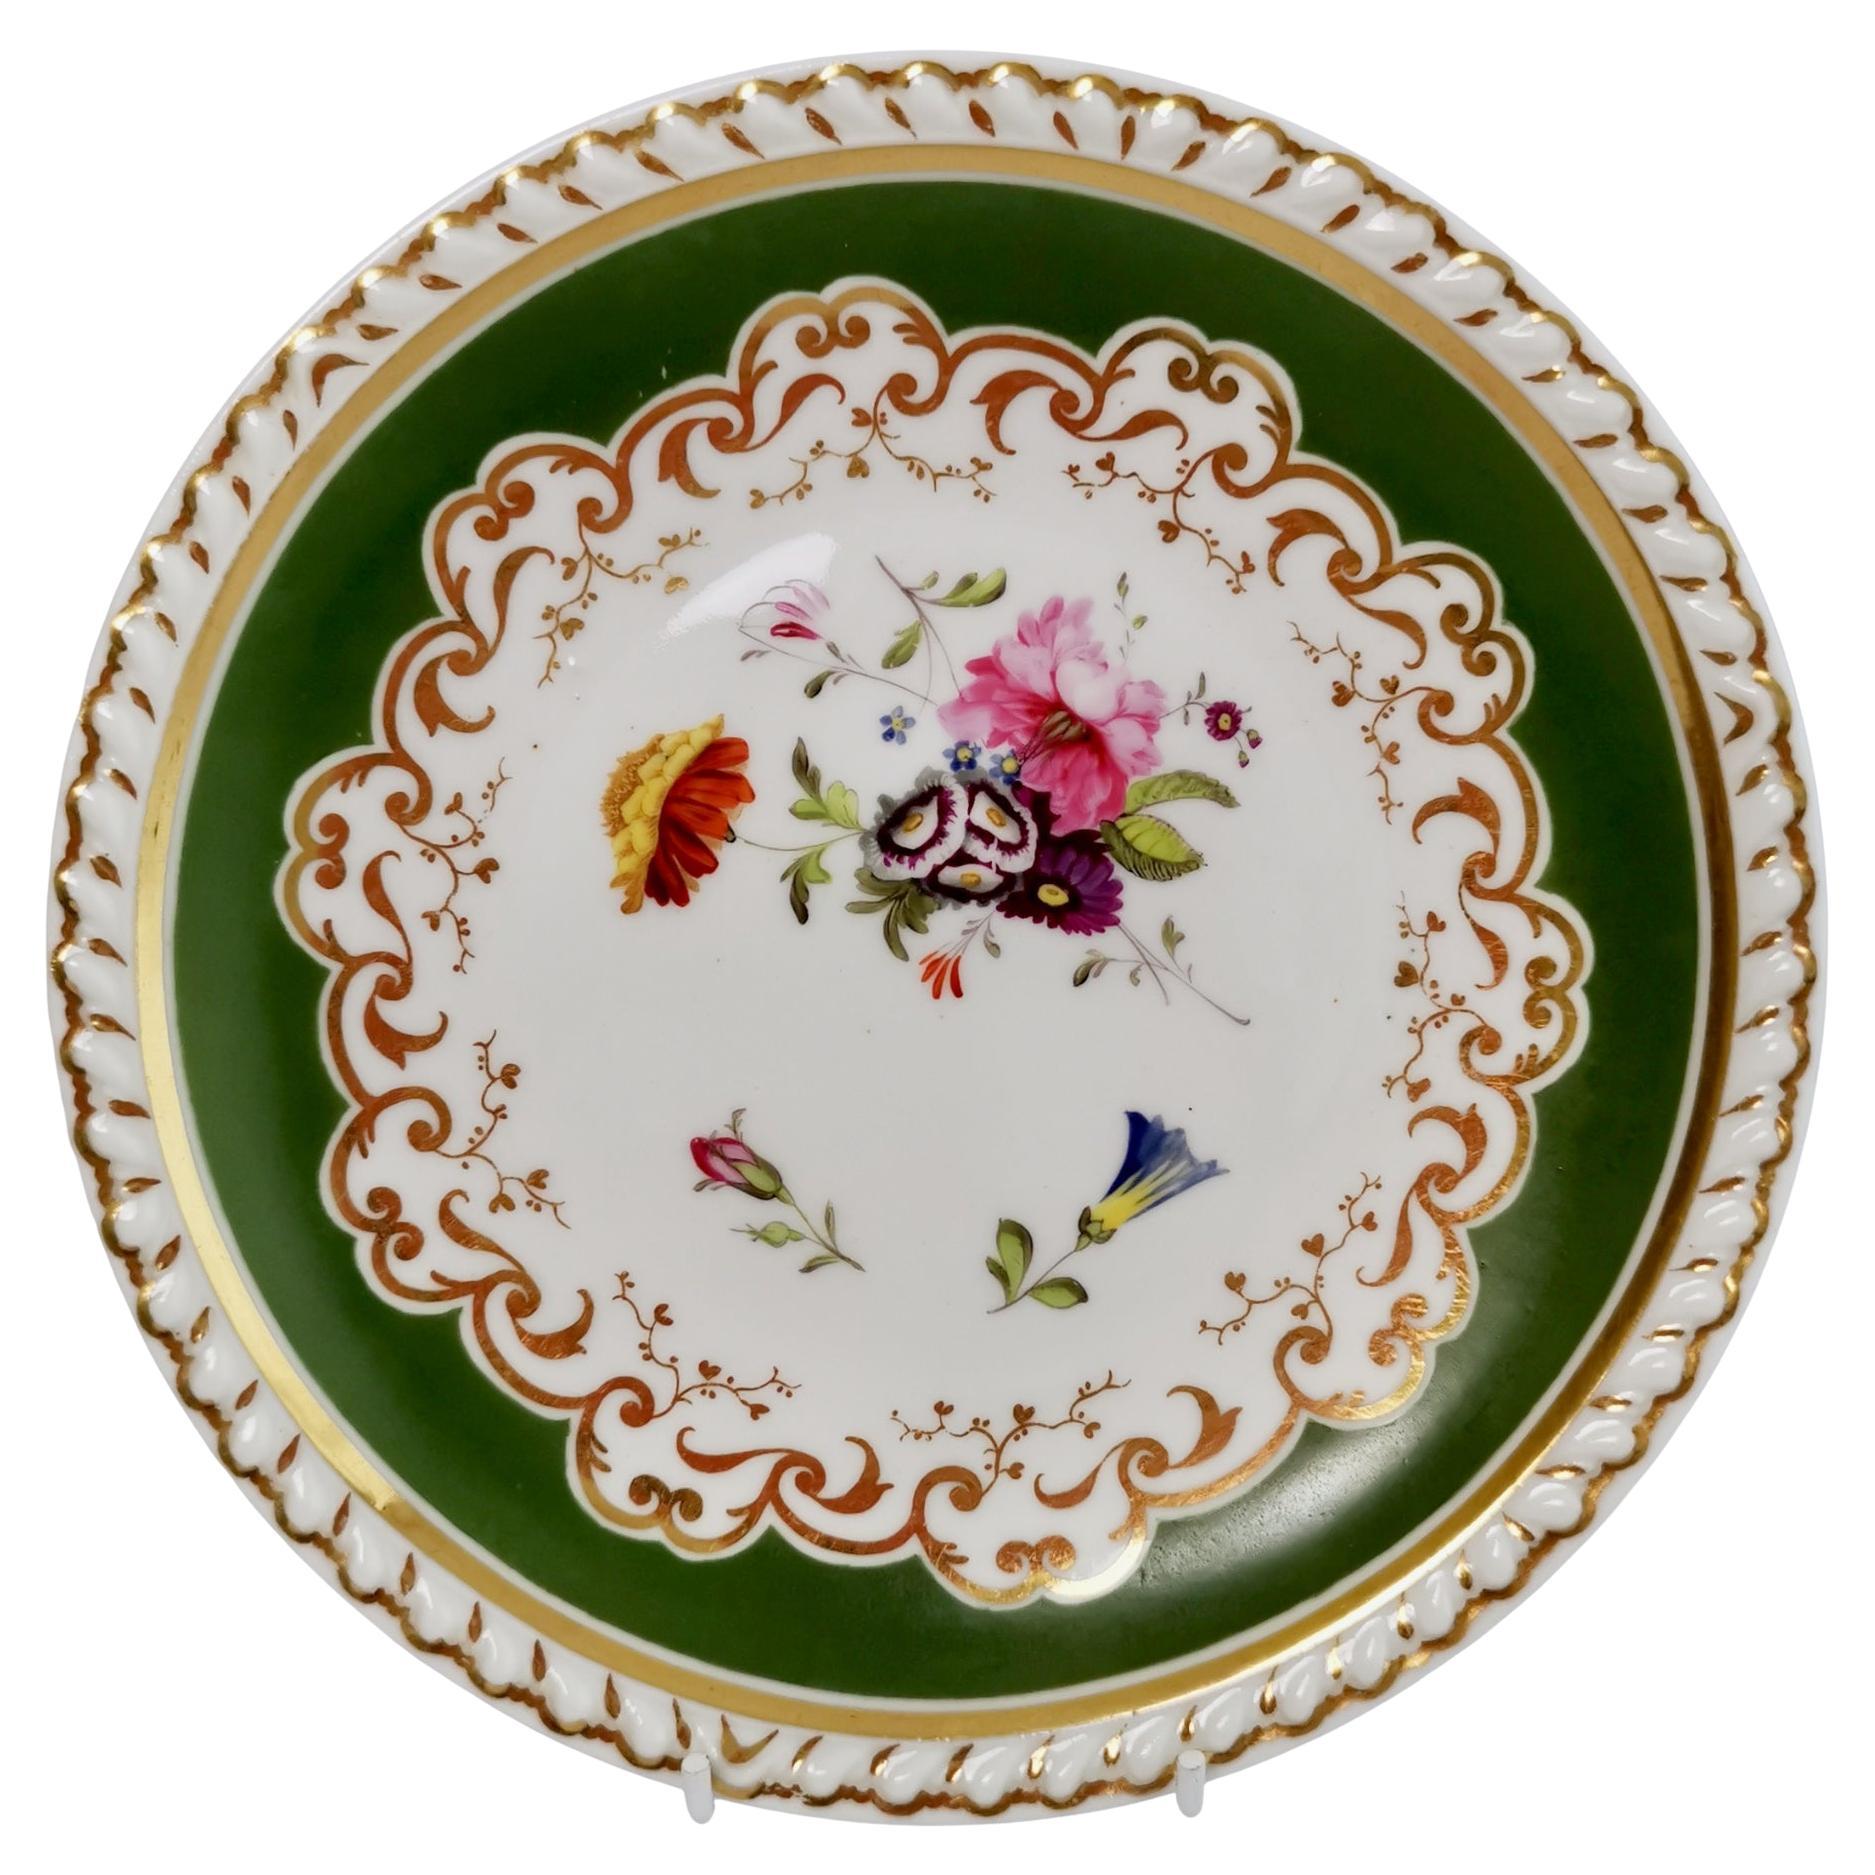 Ridgway Porcelain Plate, Green with Hand Painted Flowers, Regency ca 1825